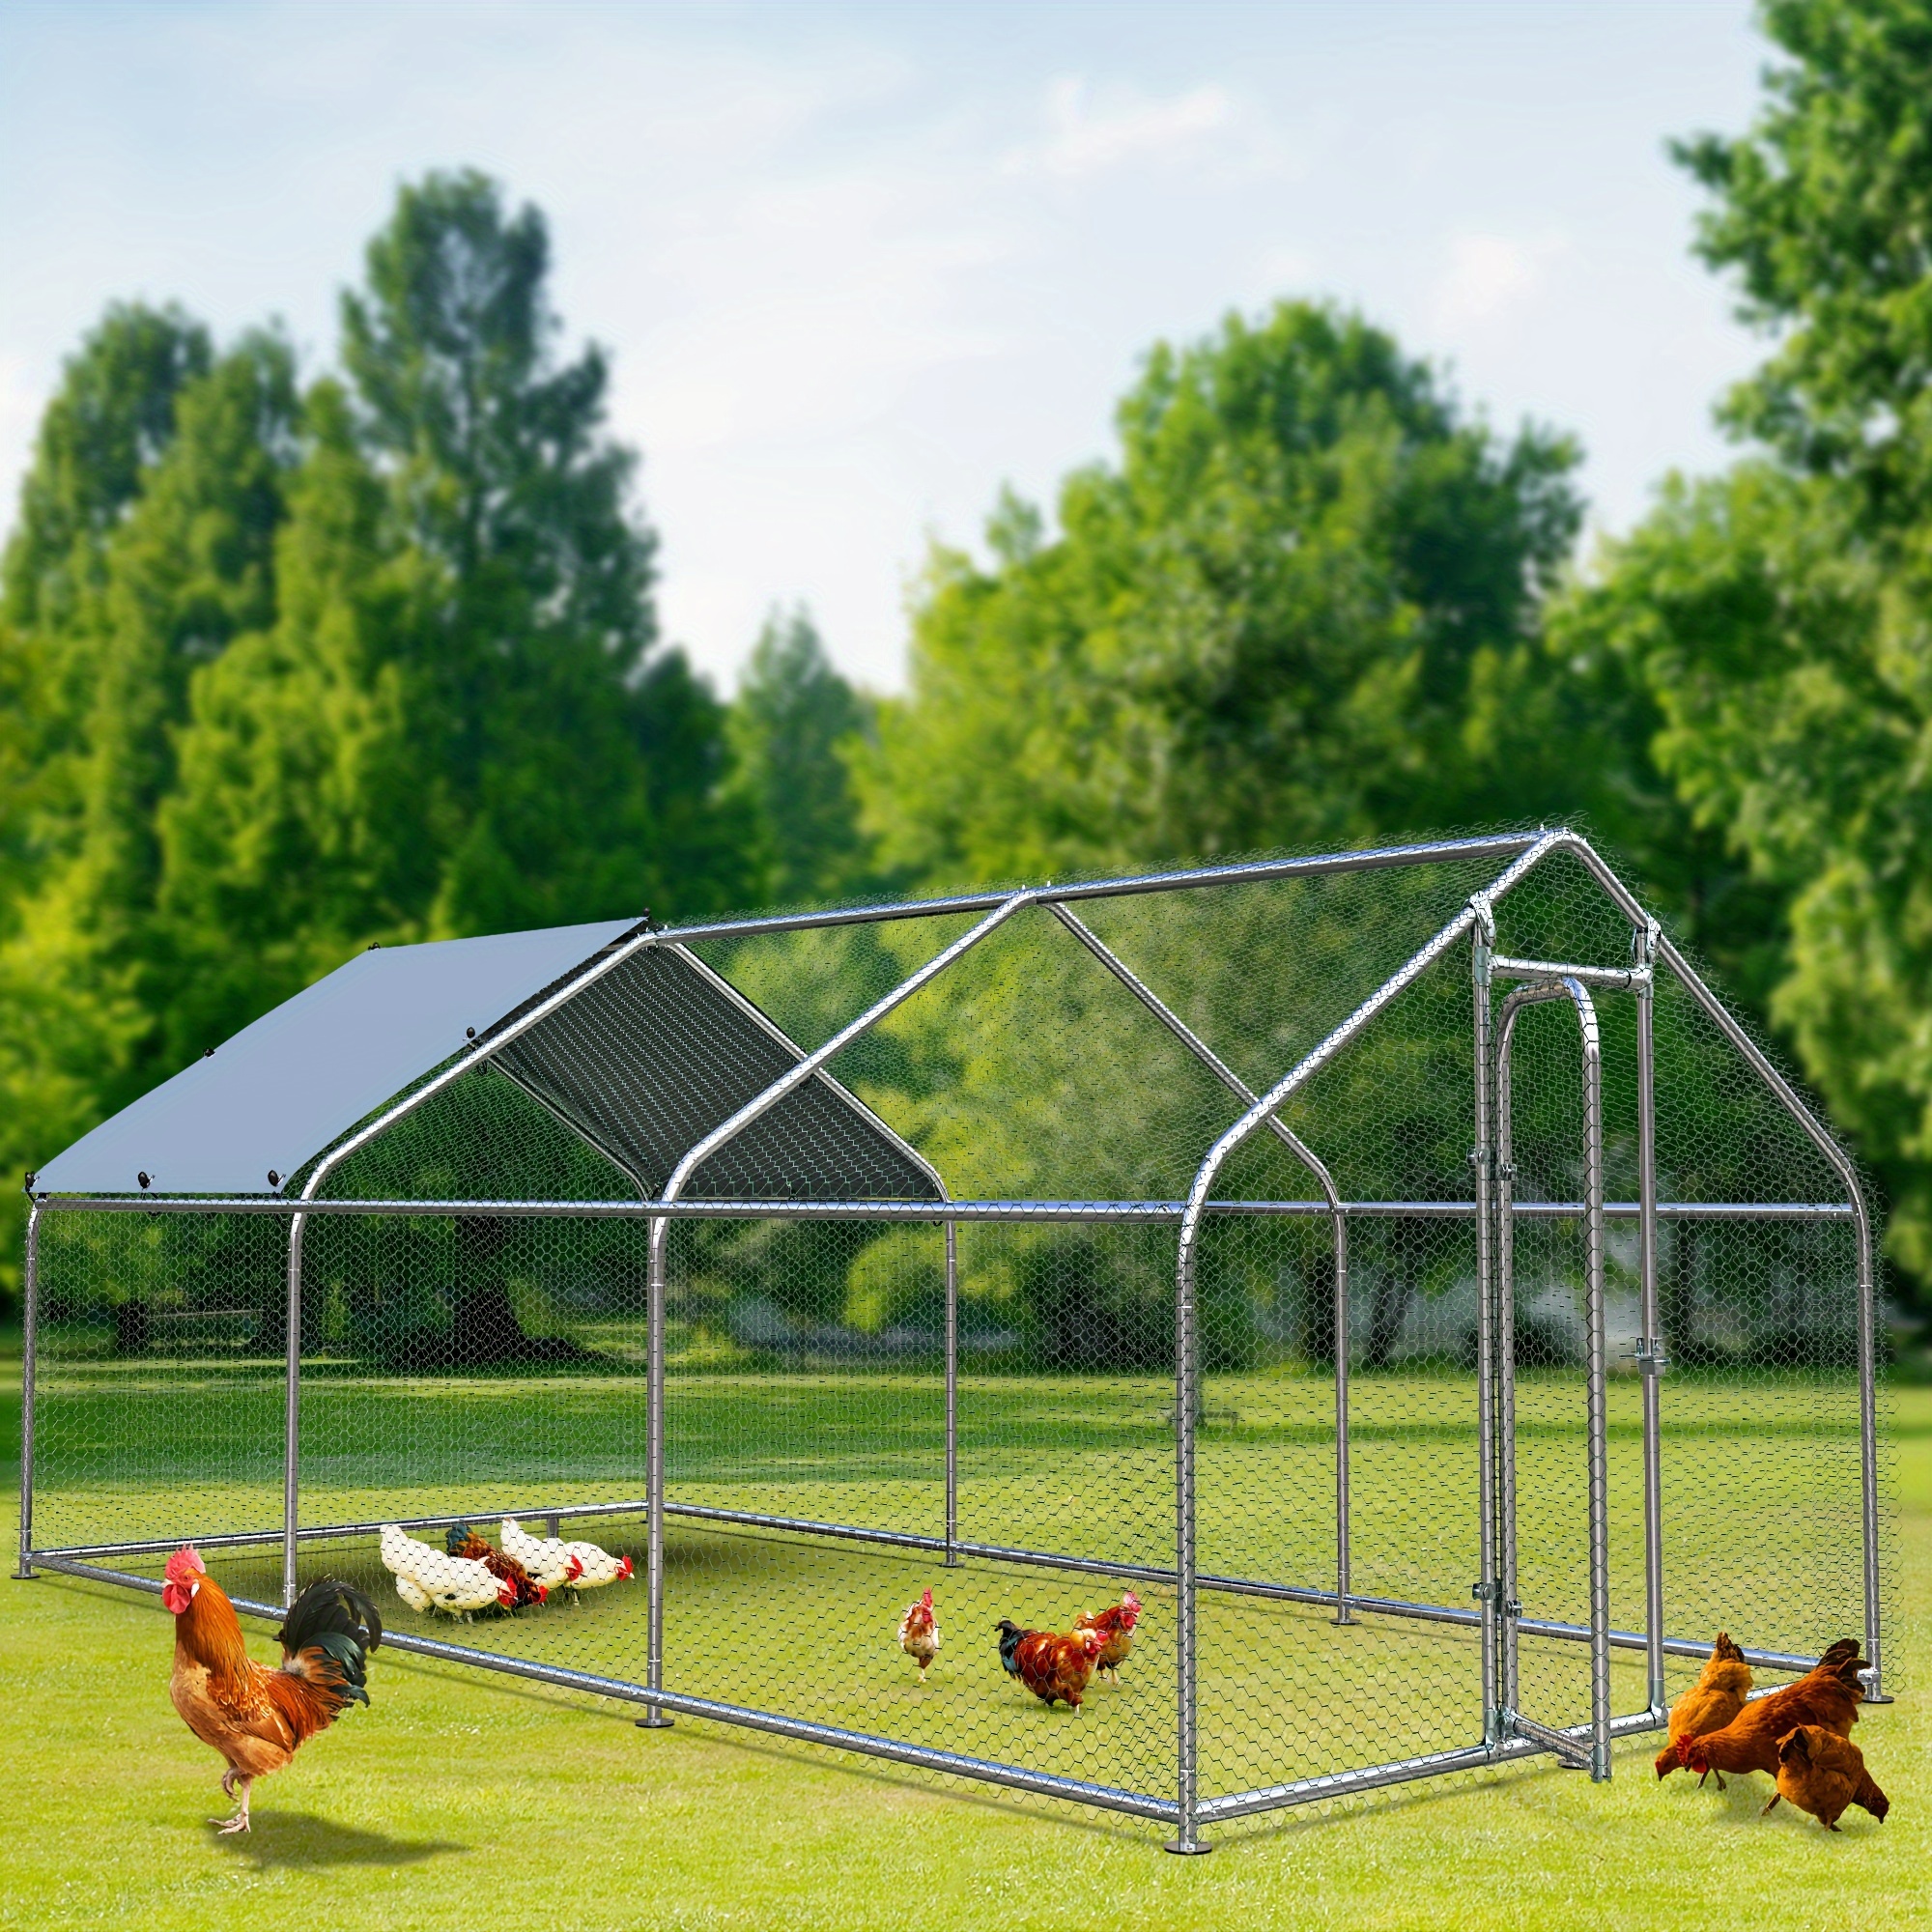 

Dwvo 20x10ft Outdoor Pet Dog Run House Kennel Shade Cage Enclosure W/ Cover Playpen Backyard Large Metal Chicken Coop Walk-in